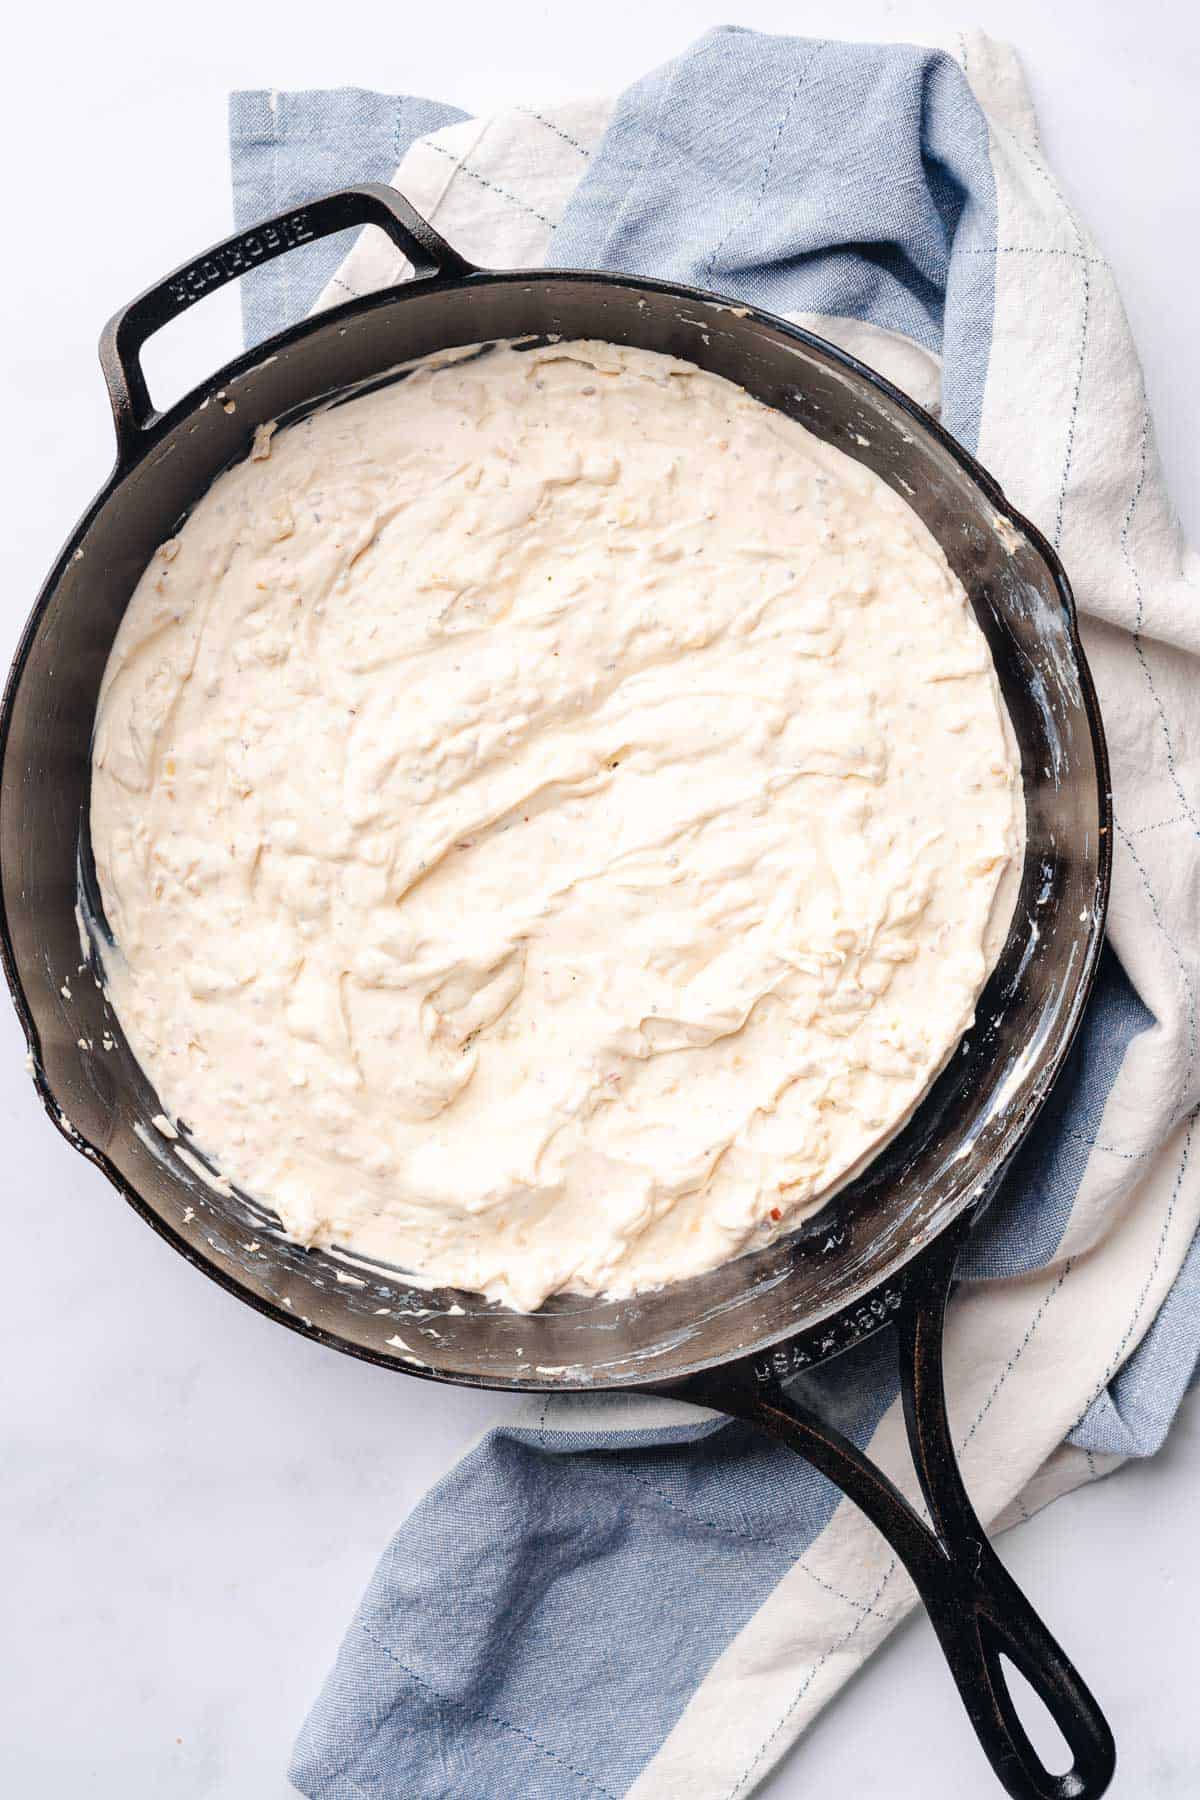 softened cream cheese and sour cream in a cast iron skillet